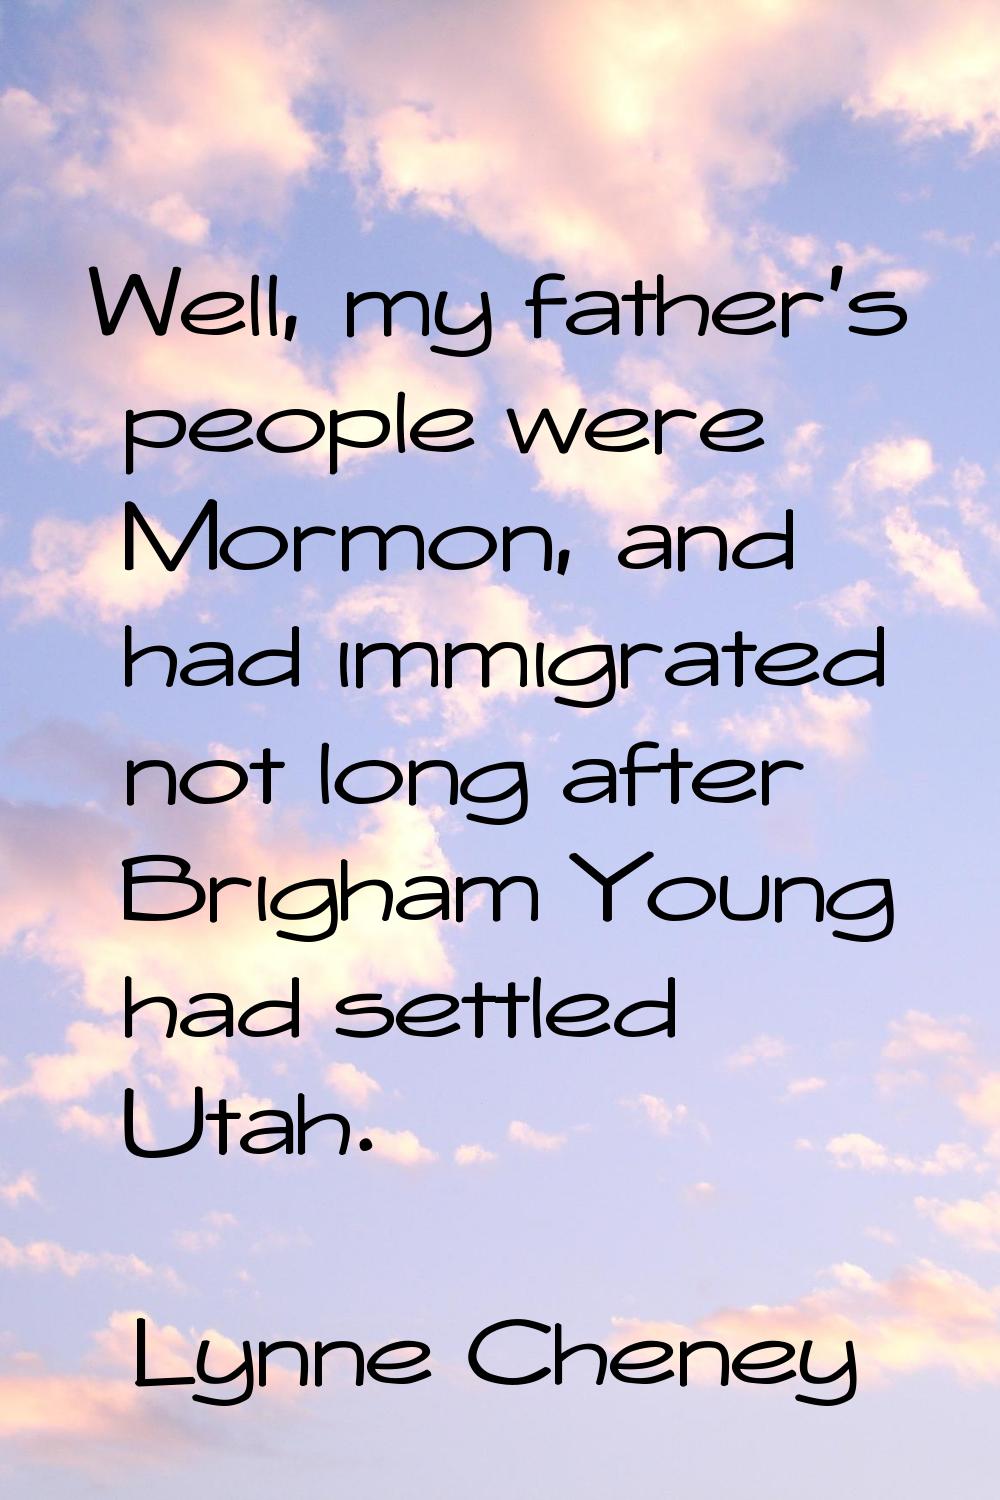 Well, my father's people were Mormon, and had immigrated not long after Brigham Young had settled U